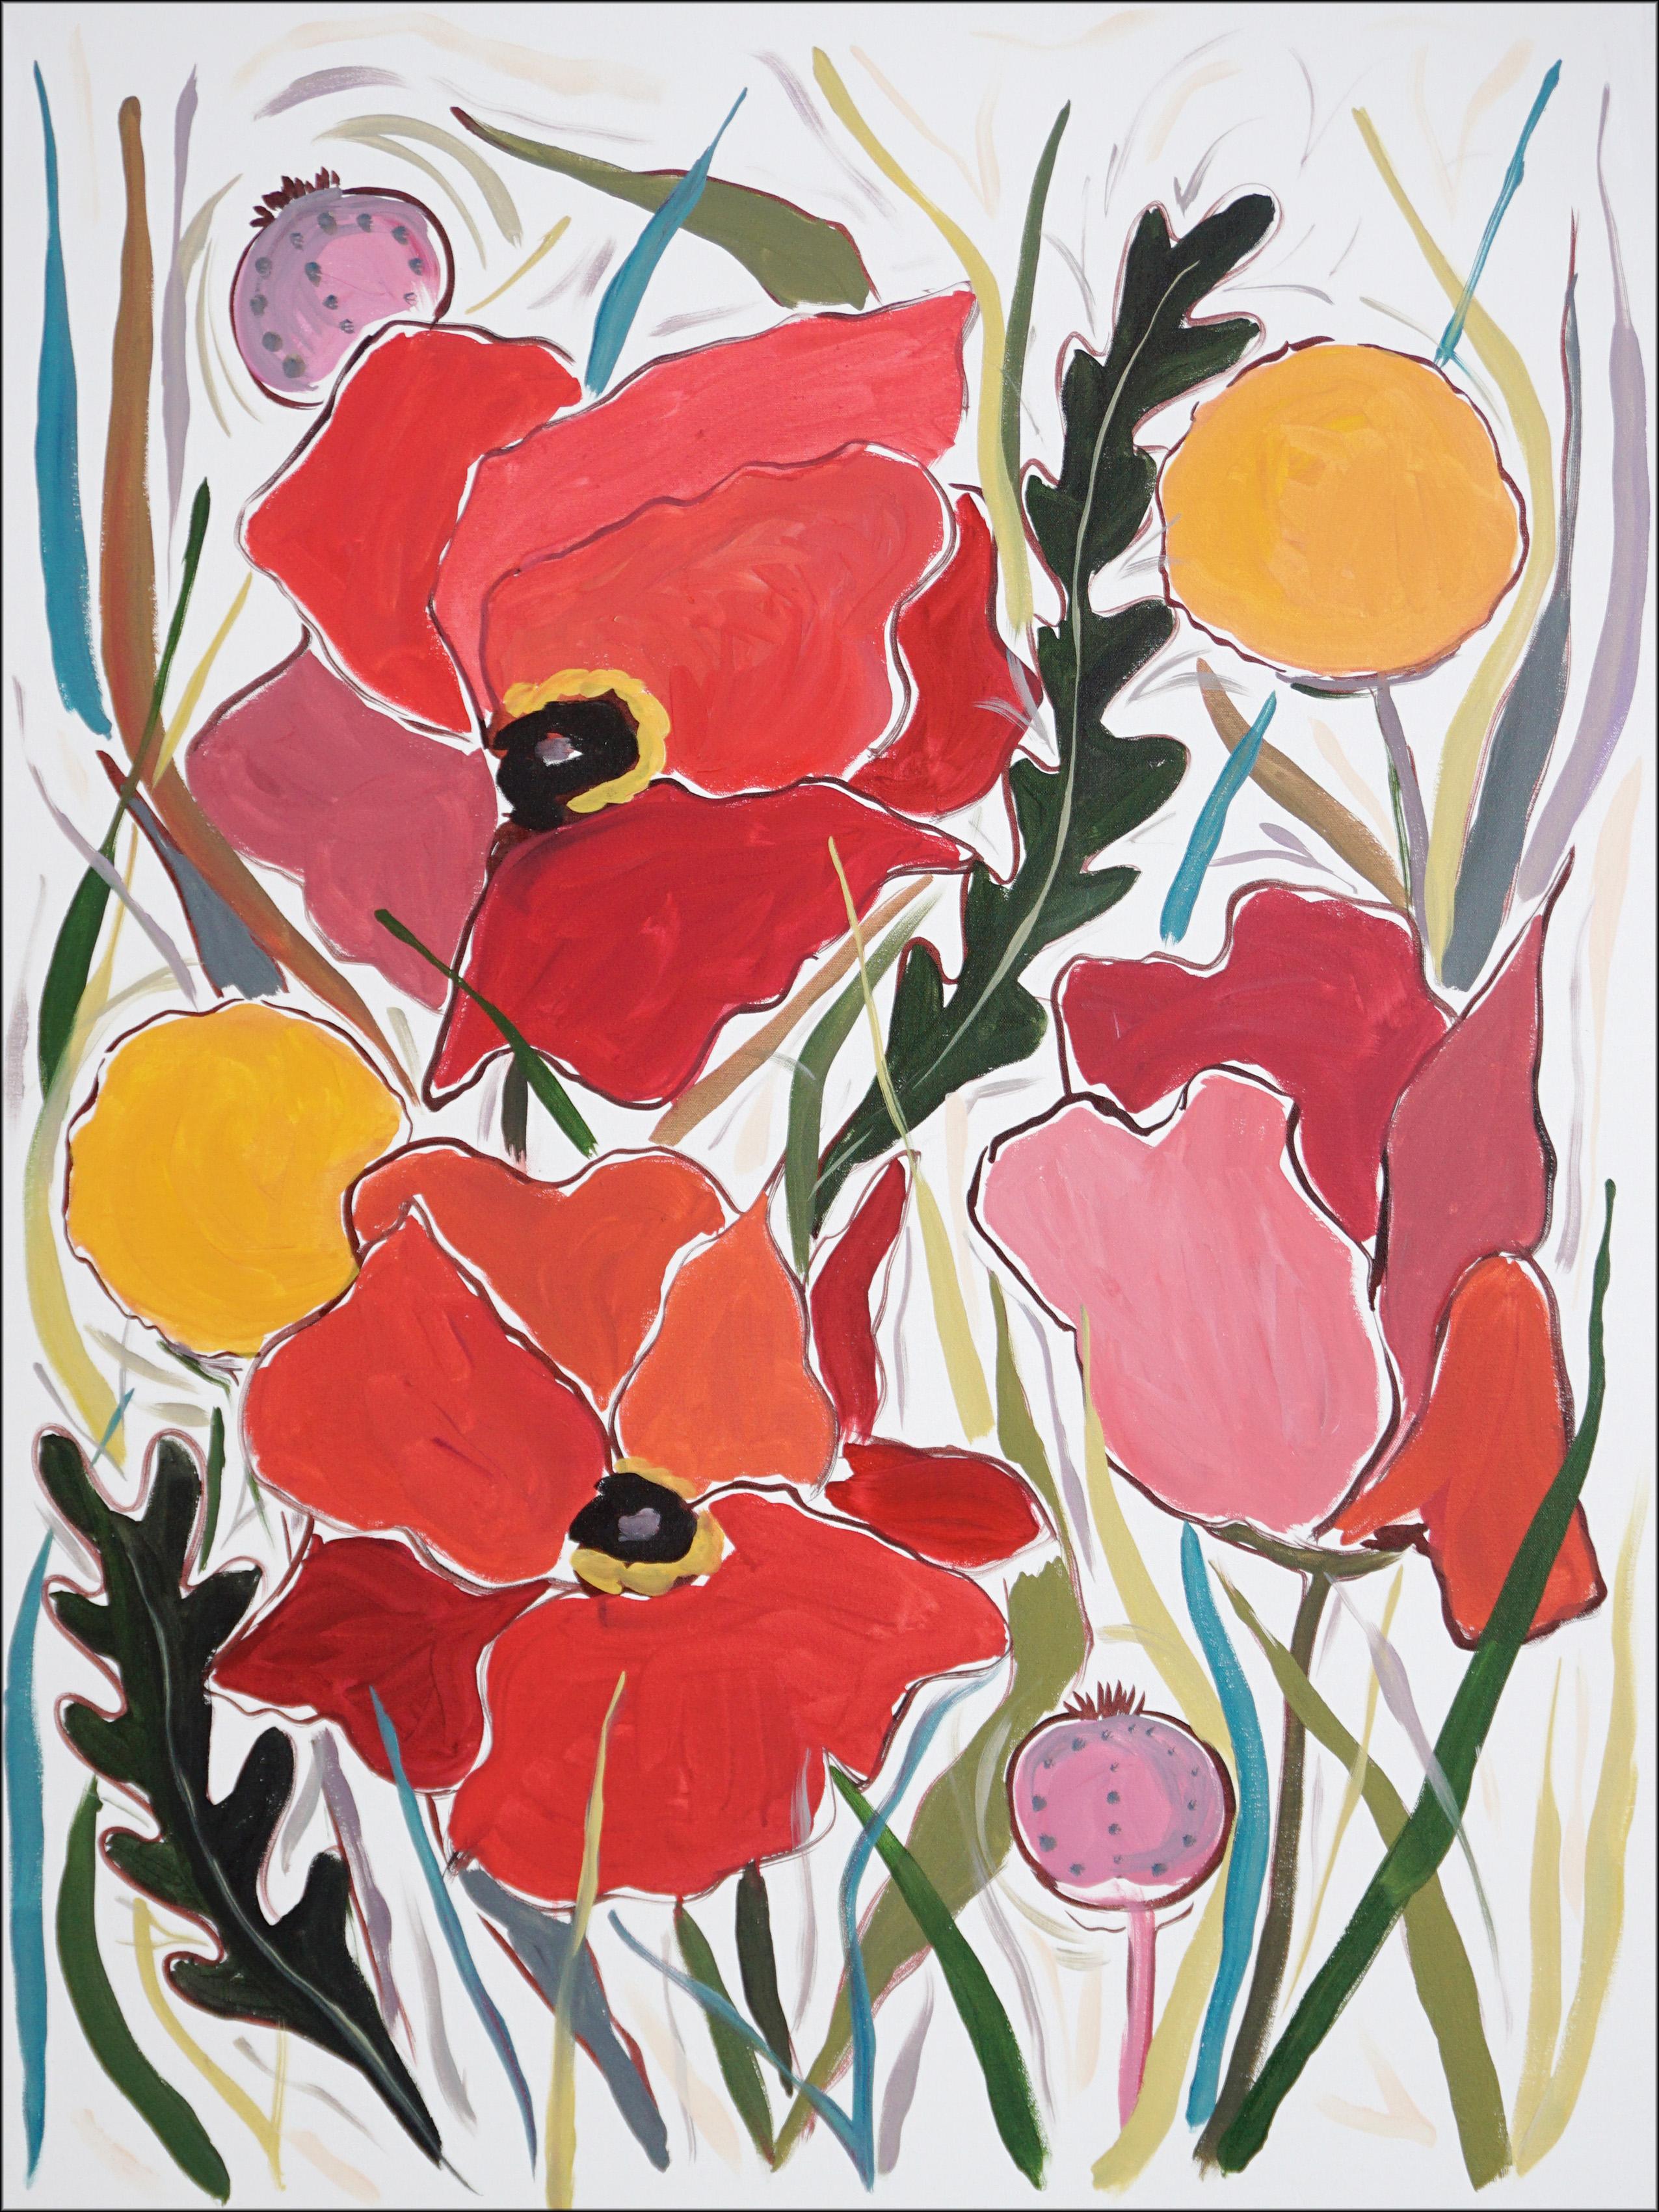 Romina Milano Still-Life Painting - Red Giant Poppies and Yellow Craspedia Flowers on Canvas, Illustration Prairie